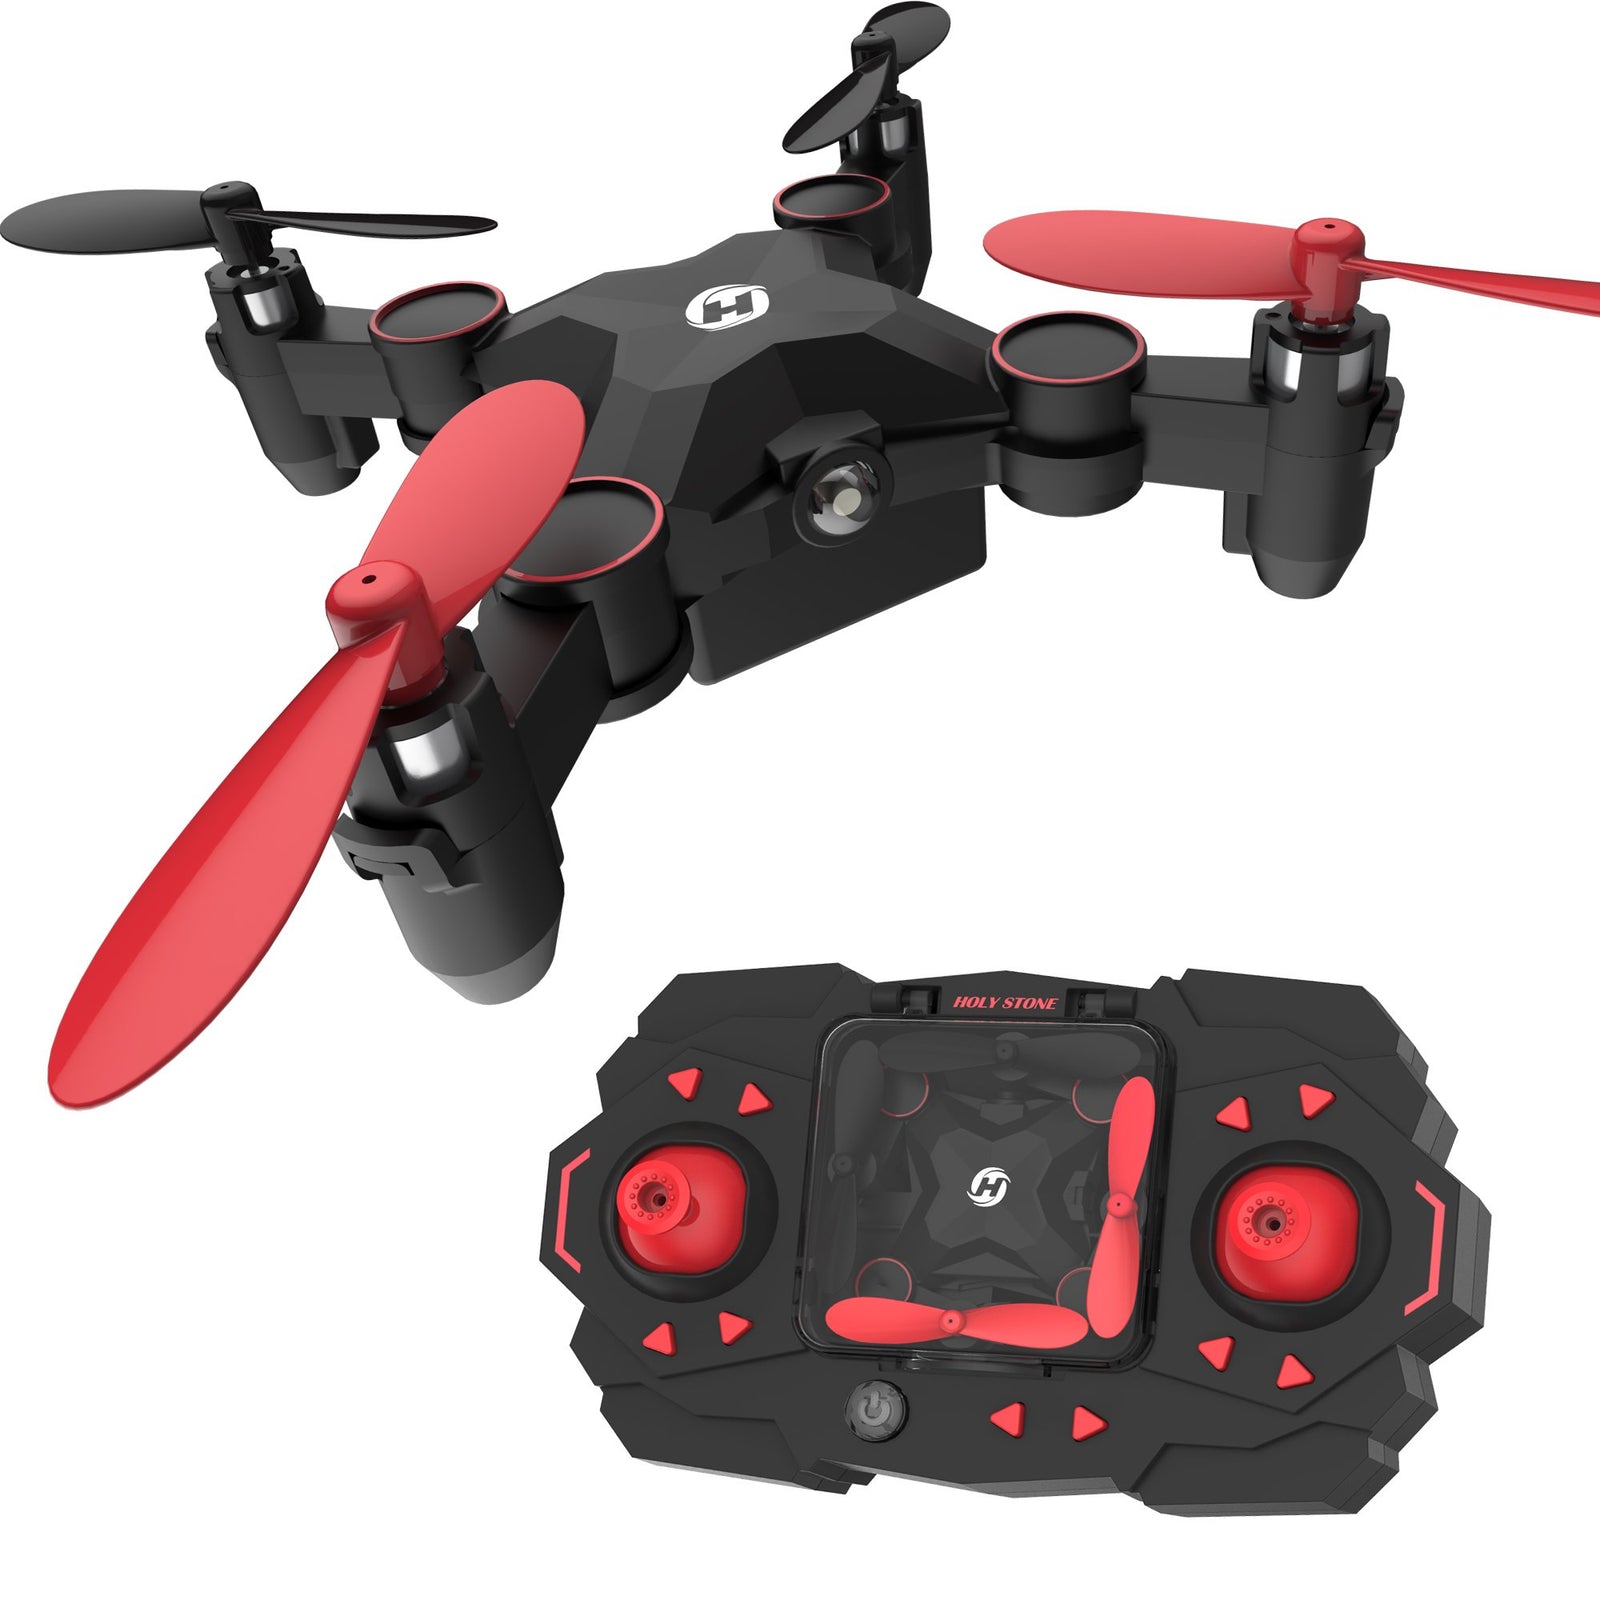 Holy Stone HS190 Foldable Mini Nano RC Drone for Kids Gift Portable Pocket Quadcopter with Altitude Hold 3D Flips and Headless Mode Easy to Fly for Beginners